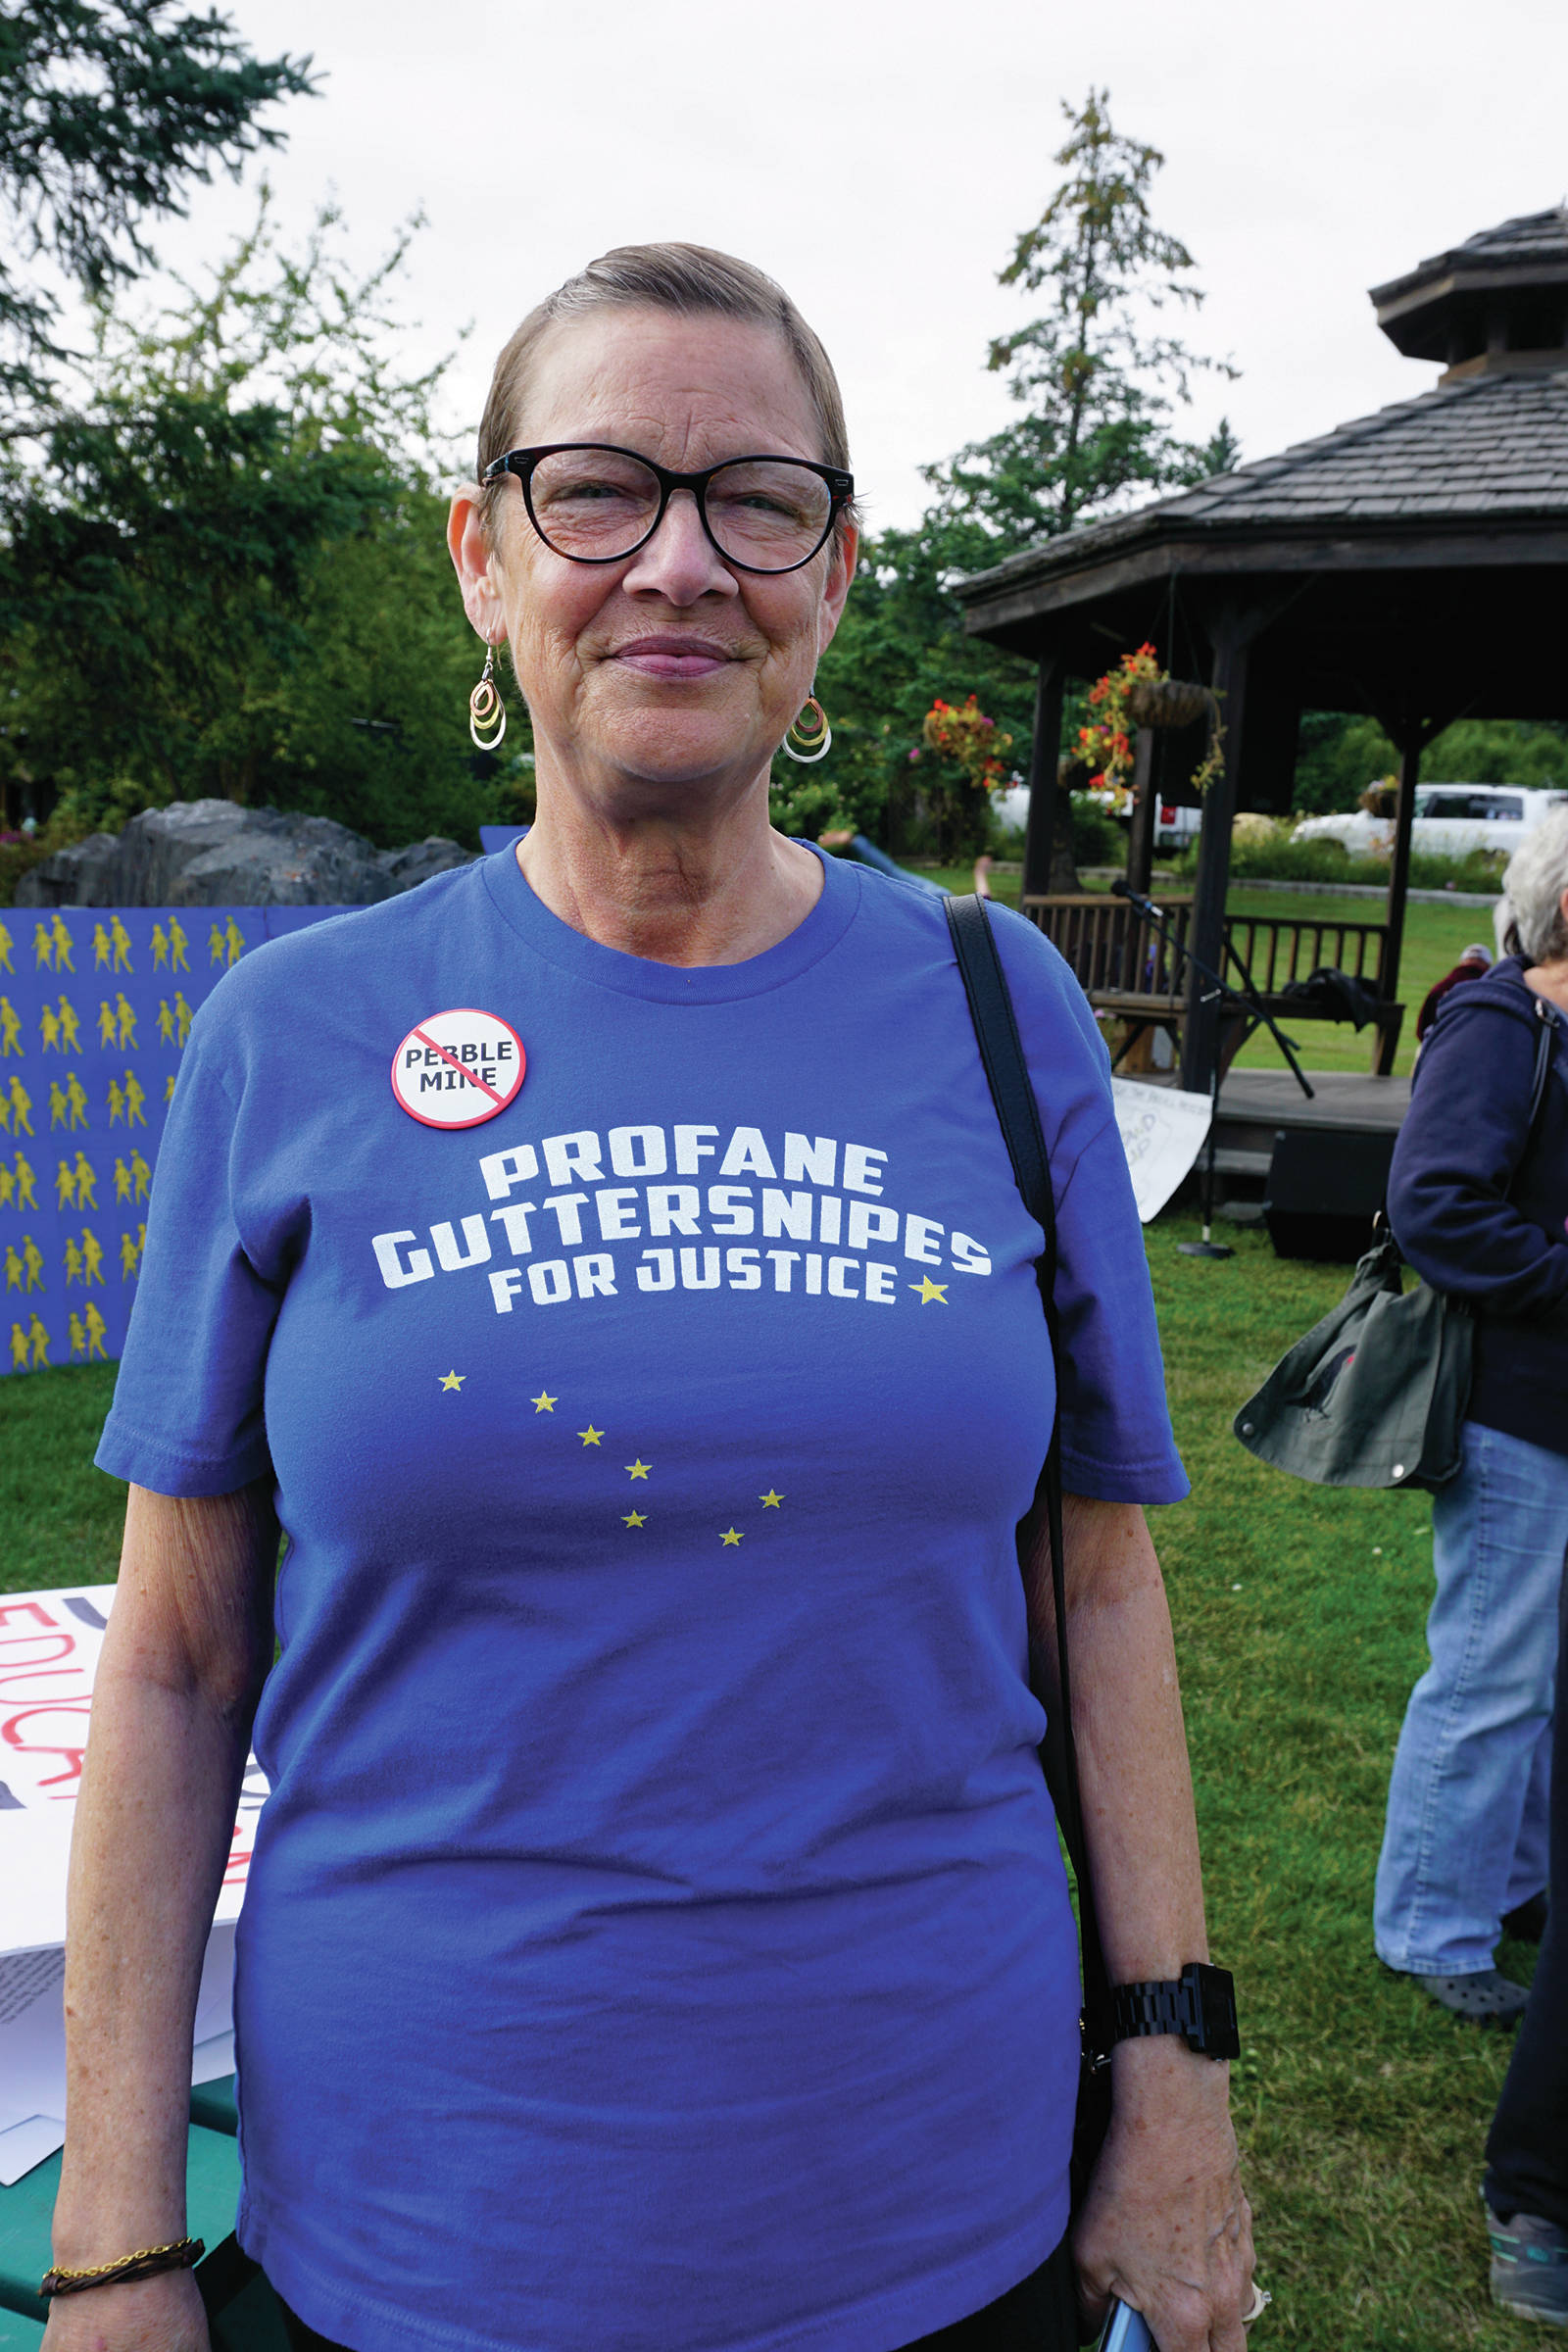 Michele Vasquez wears a “profane guttersnipes for justice” T-shirt at a Recall Dunleavy rally held on Aug. 1, 2019, at WKFL Park in Homer, Alaska. The slogan comes from a Republican Party reference to people who protested a Wasilla Middle School during the special session held earlier in July. Vasquez and her husband, Larry Simmons, visited Homer from Soldotna and stopped by the rally to sign recall petitions. (Photo by Michael Armstrong)